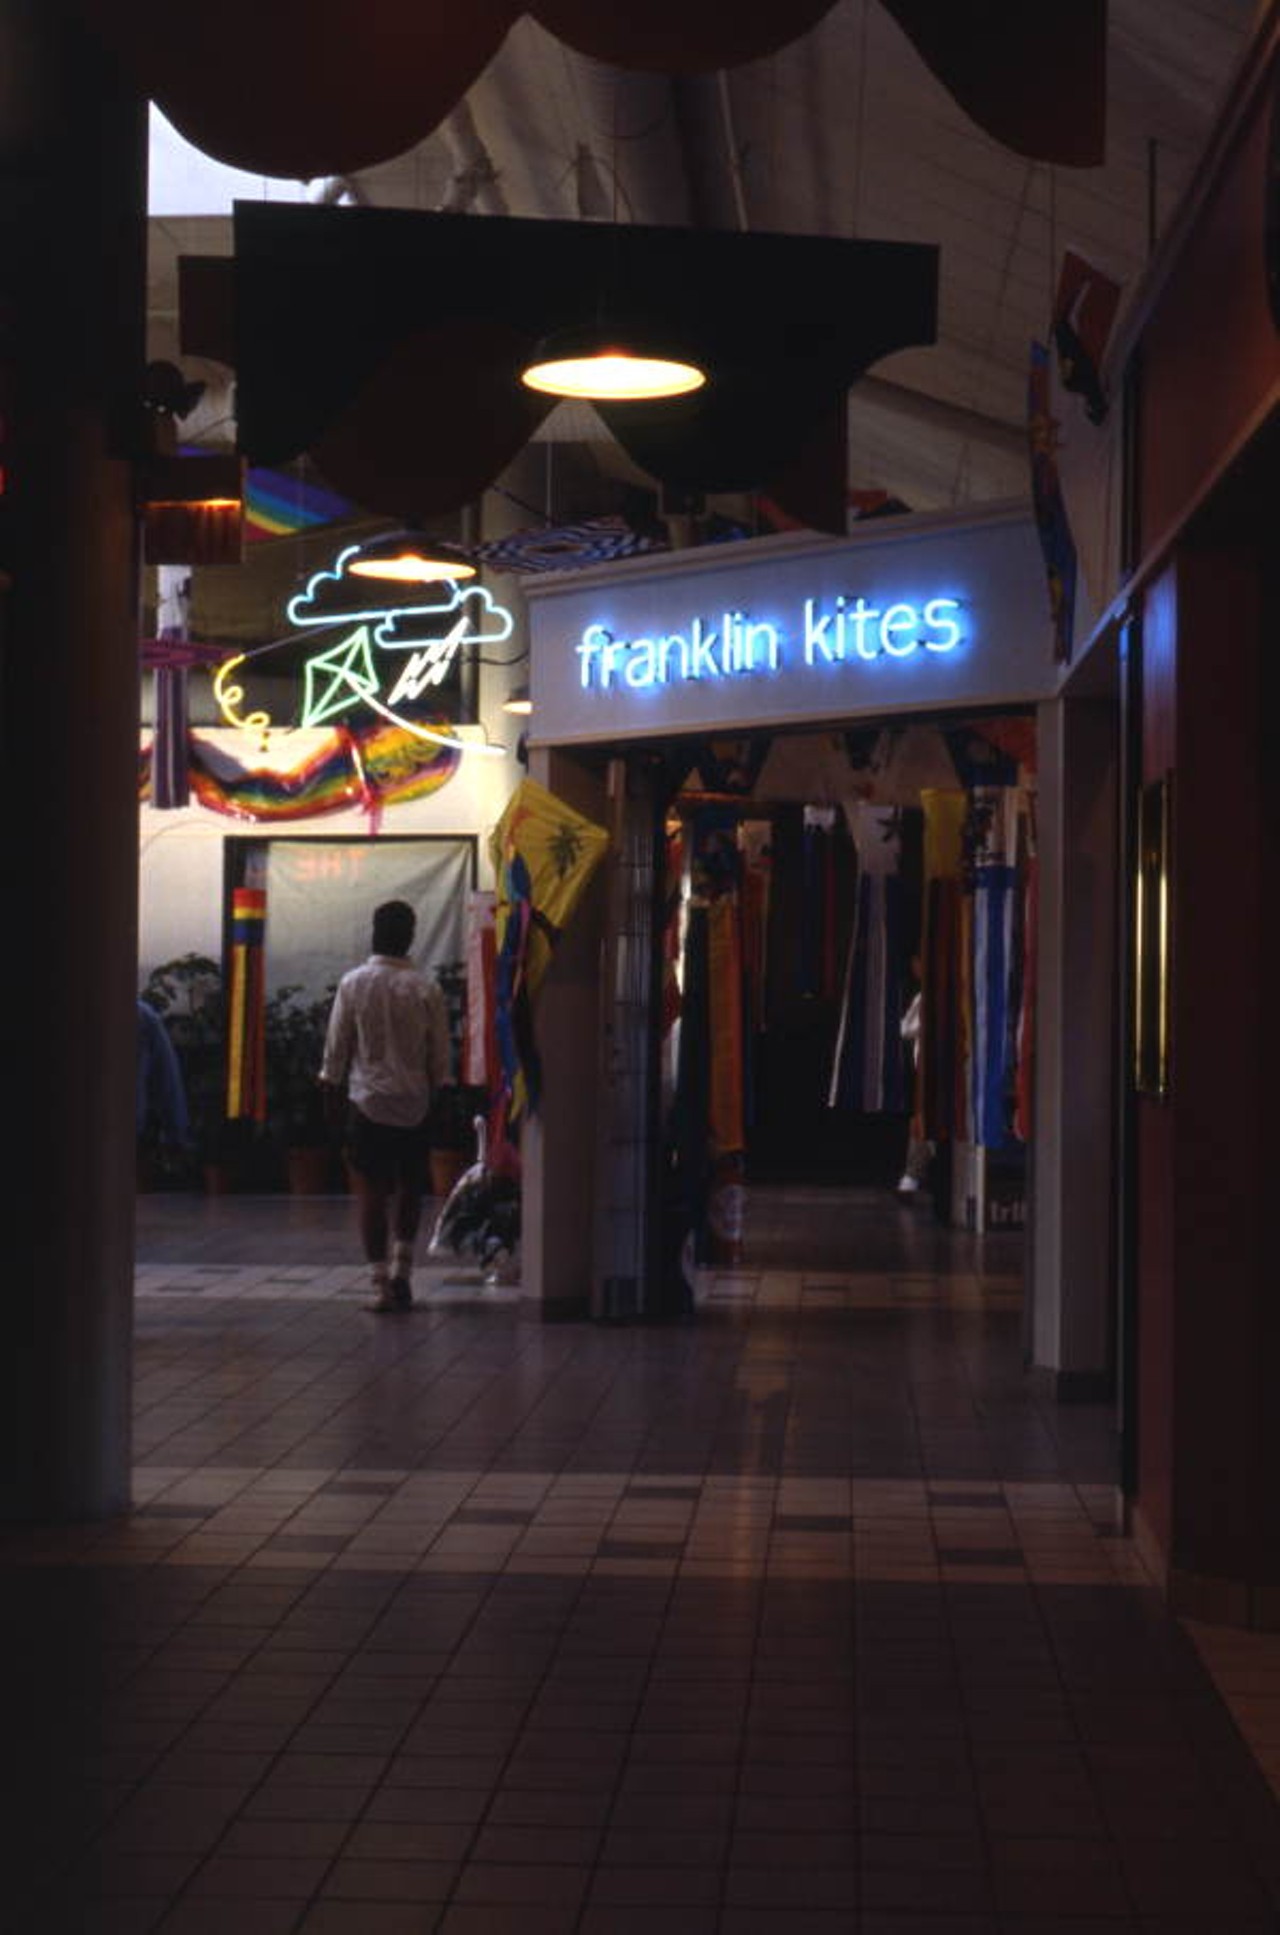 Franklin Kites in the Harbour Island mall in Tampa (1986).